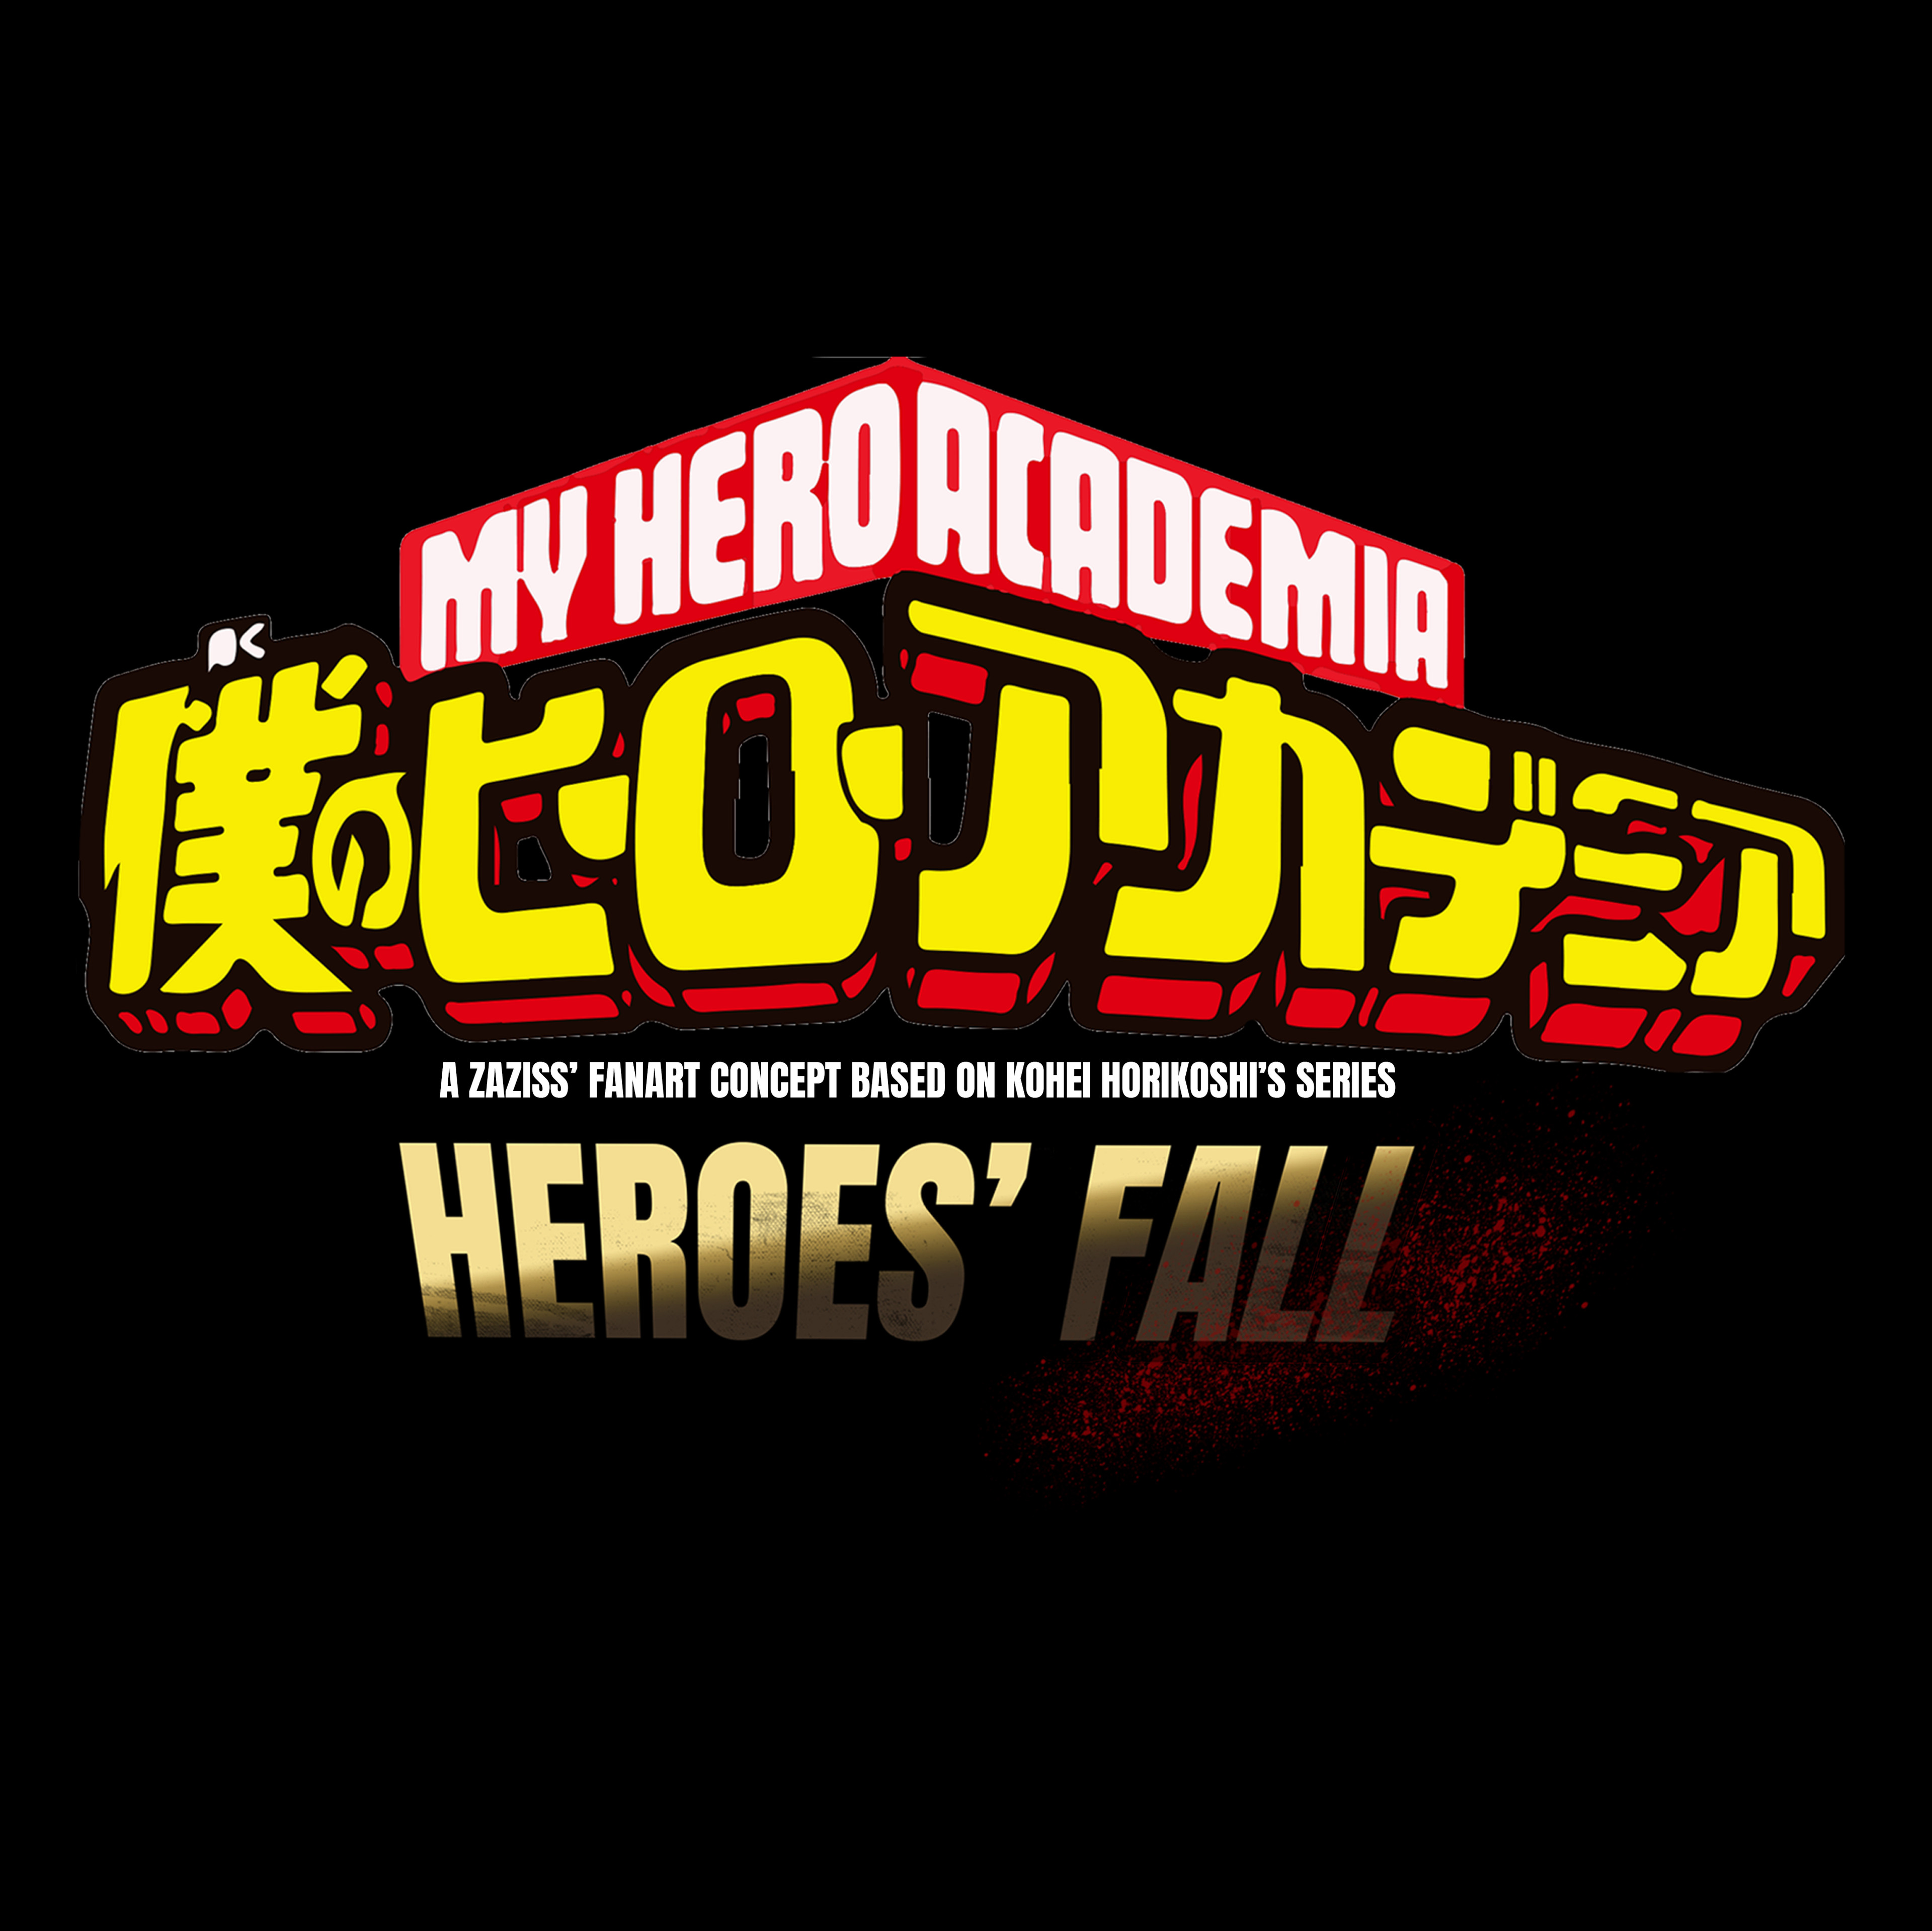 I worked on this logo as if it was a film, a special arc, video game or new media. Heroes' Fall is the name of my concept, a dystopic fan art vision of My Hero Academia.